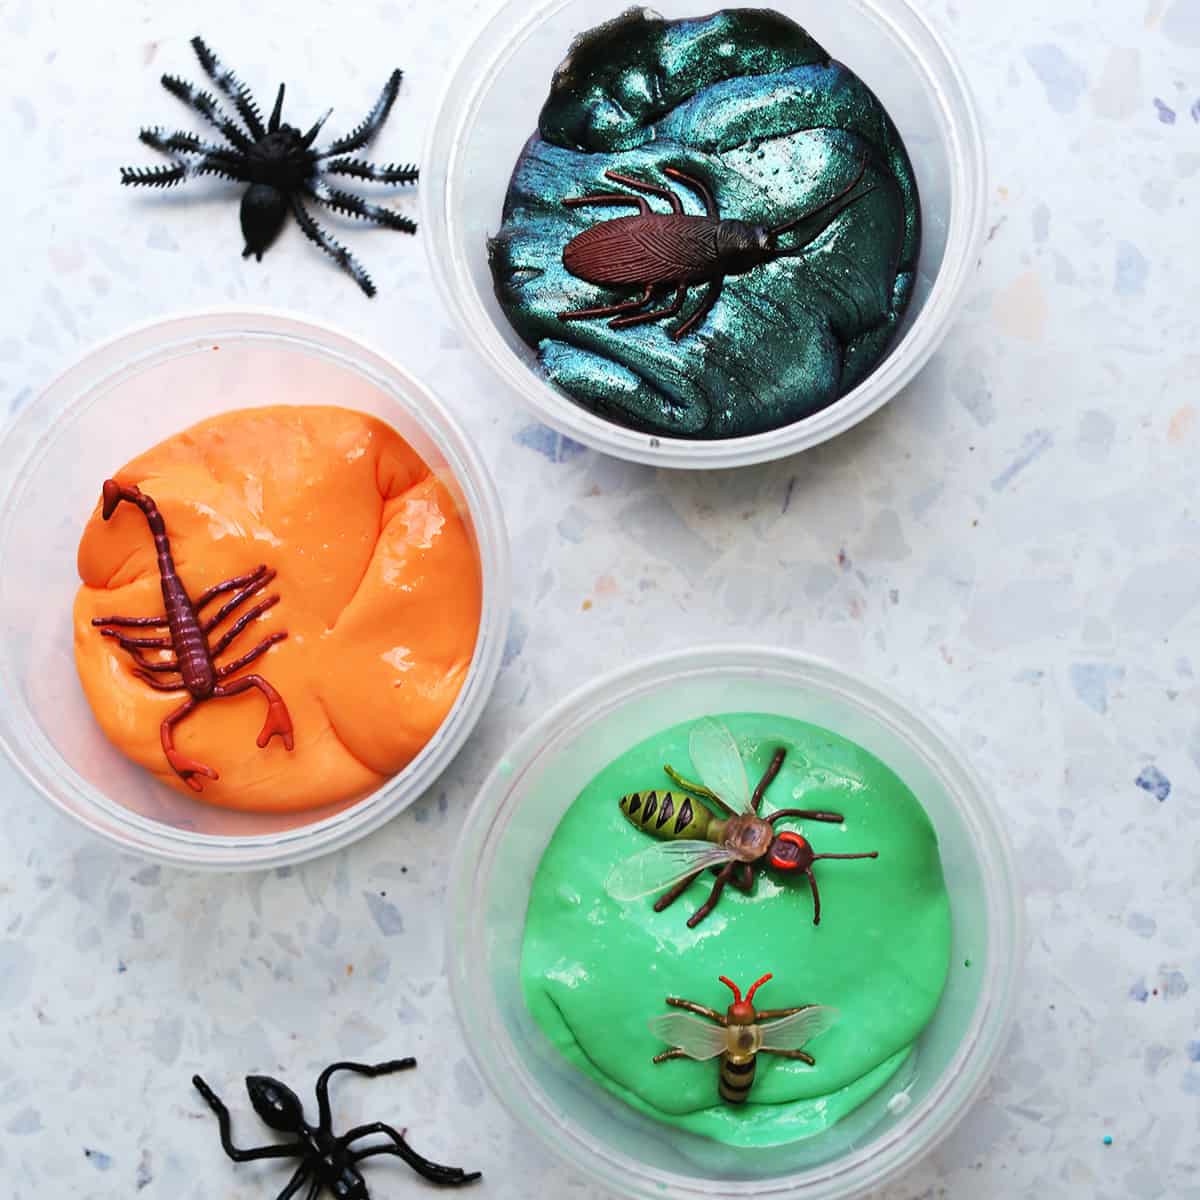 galaxy slime, orange and green slime on a counter with fake bugs.